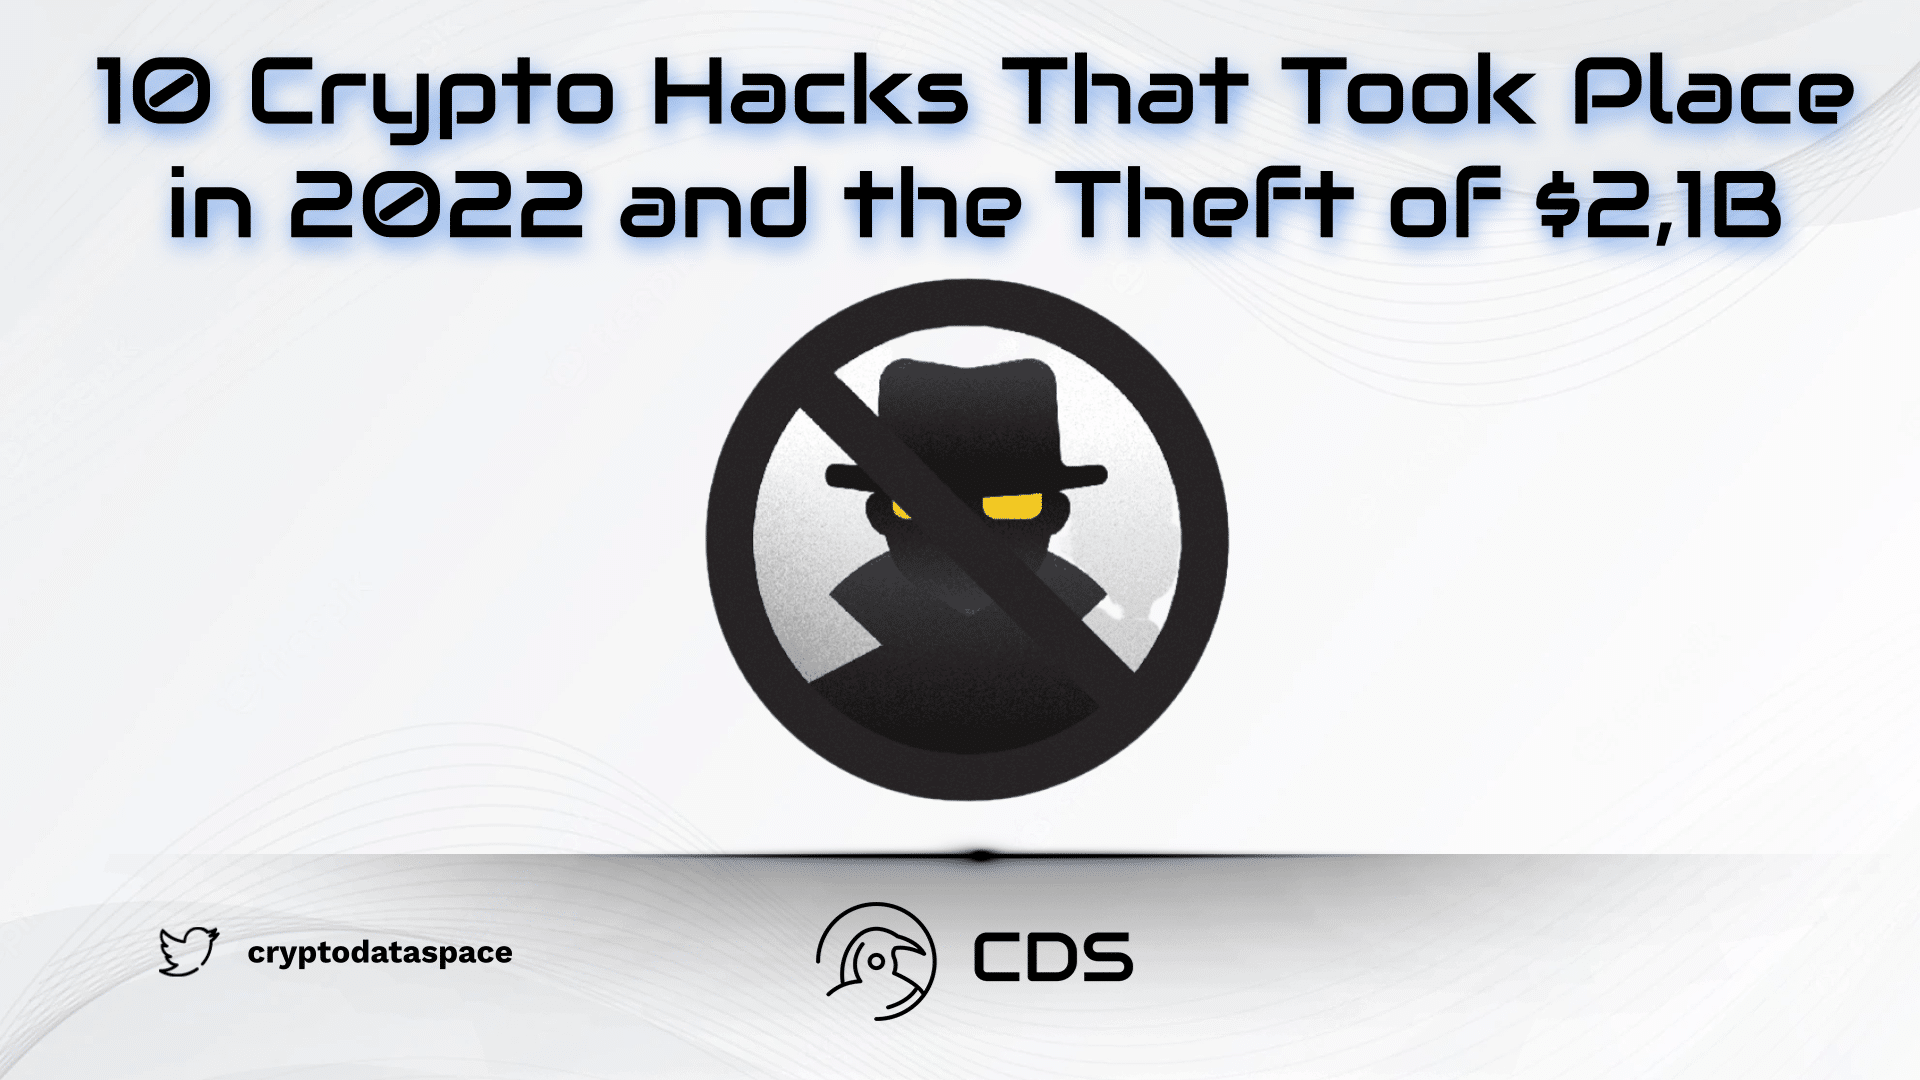 10 Crypto Hacks That Took Place in 2022 and the Theft of $2,1B